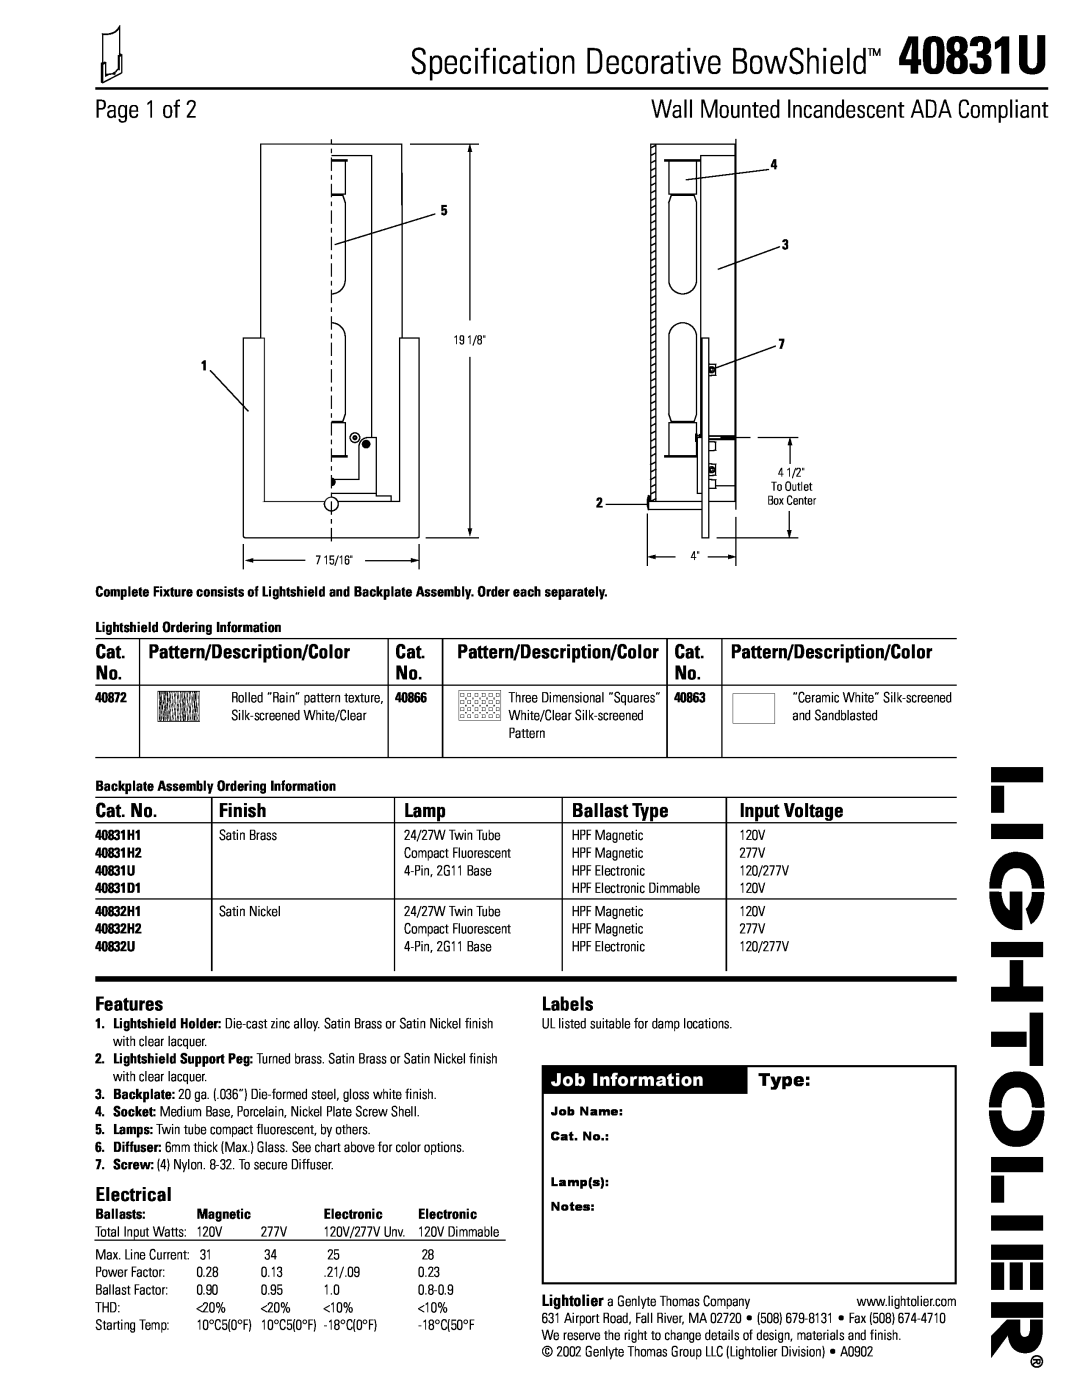 Lightolier manual Specification Decorative BowShield 40831U, Page 1 of, Wall Mounted Incandescent ADA Compliant 